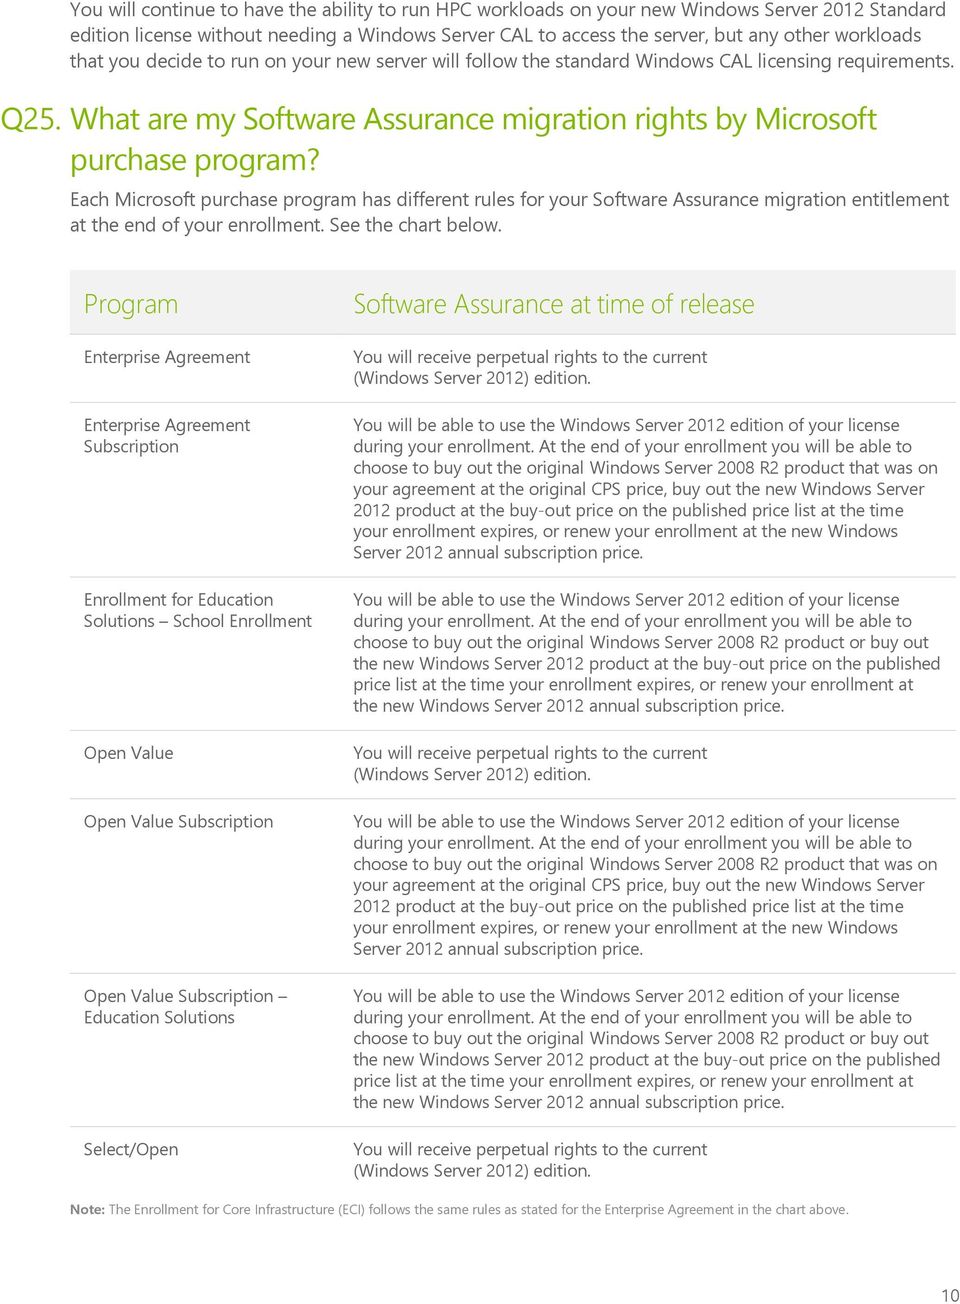 Each Microsoft purchase program has different rules for your Software Assurance migration entitlement at the end of your enrollment. See the chart below.